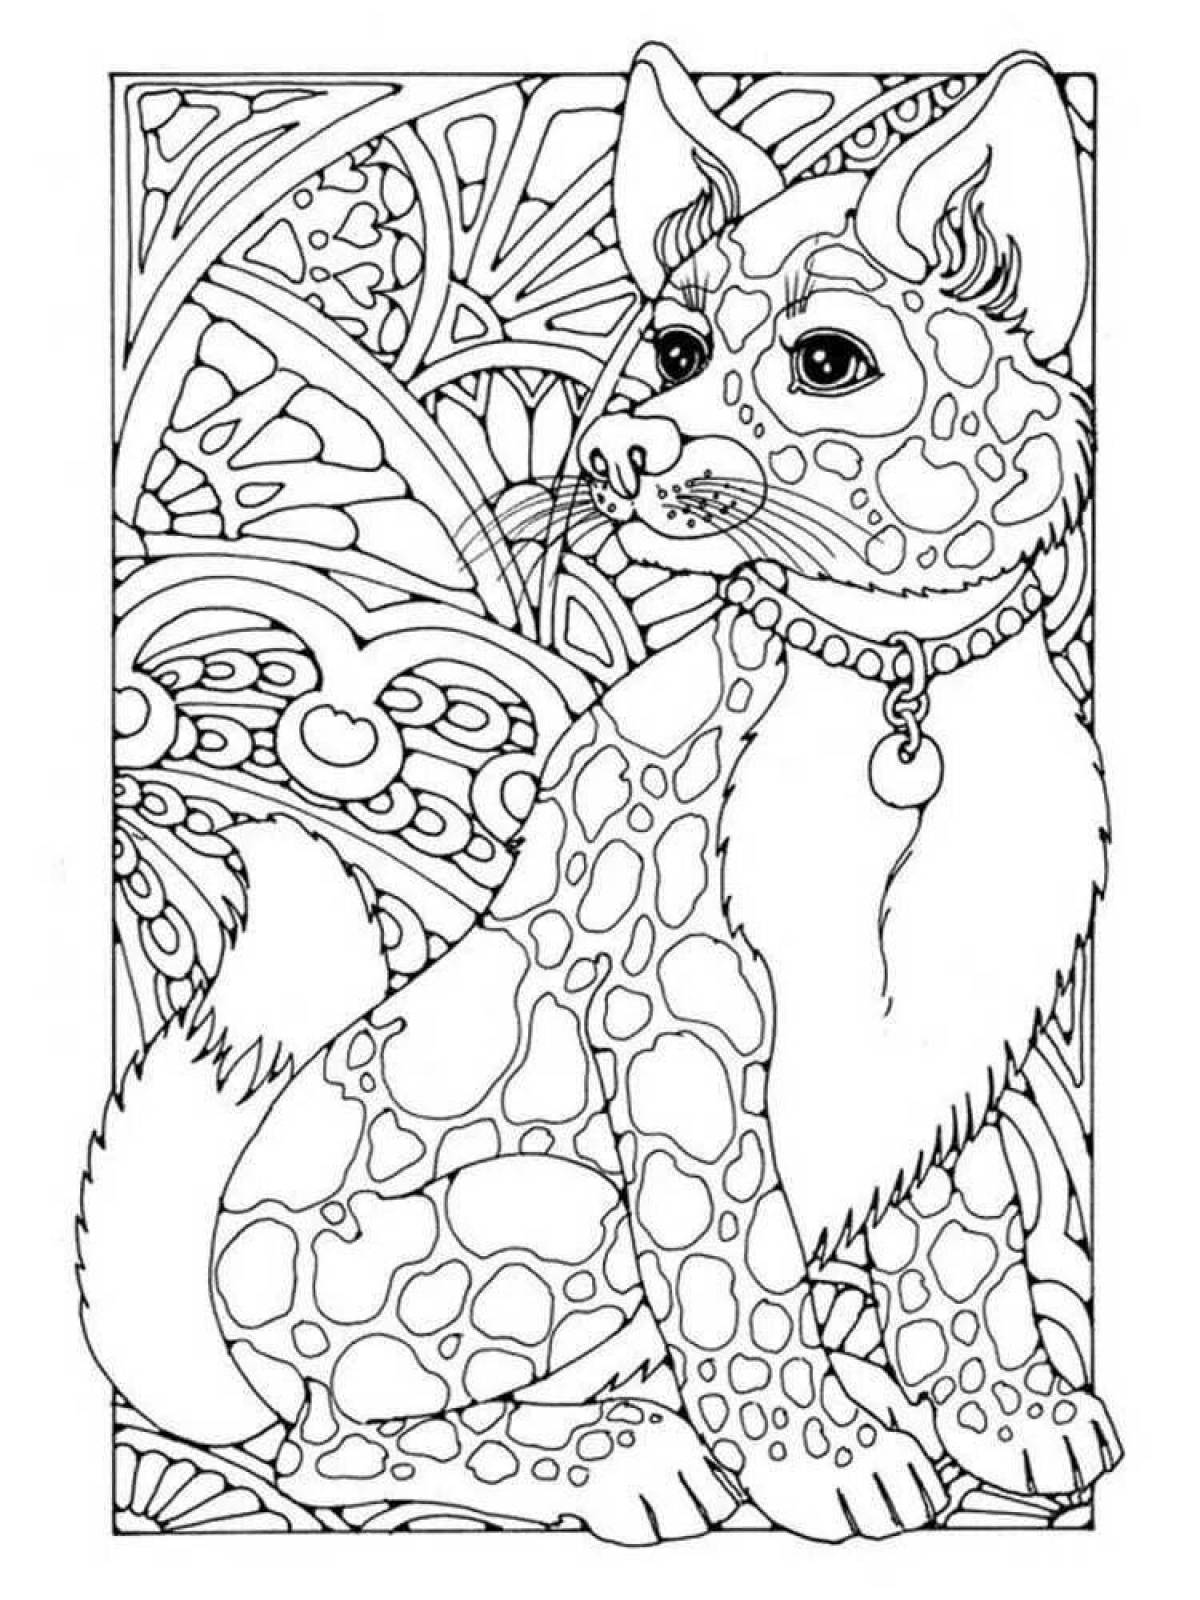 Fluffy dog ​​coloring pages for adults